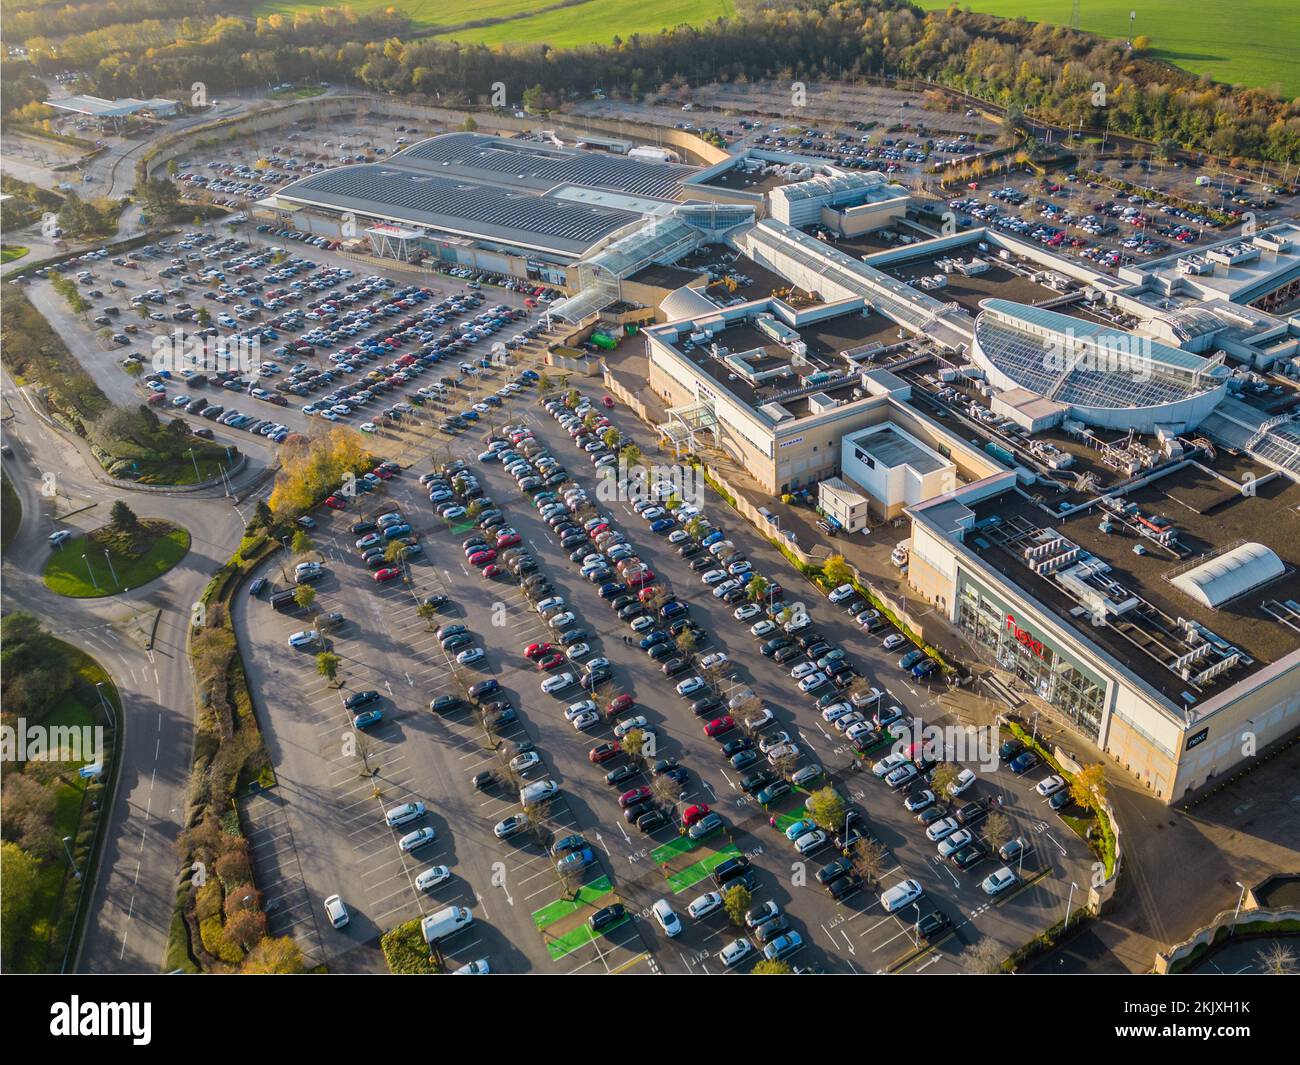 Leeds, UK. 25th November, 2022. Black Friday sales commence at White Rose Shopping Centre in Leeds, West Yorkshire. Aerial View shows car parks nearly full before the shops open at 10am with retailers hoping to draw in customers despite the cost of living crisis. Stock Photo